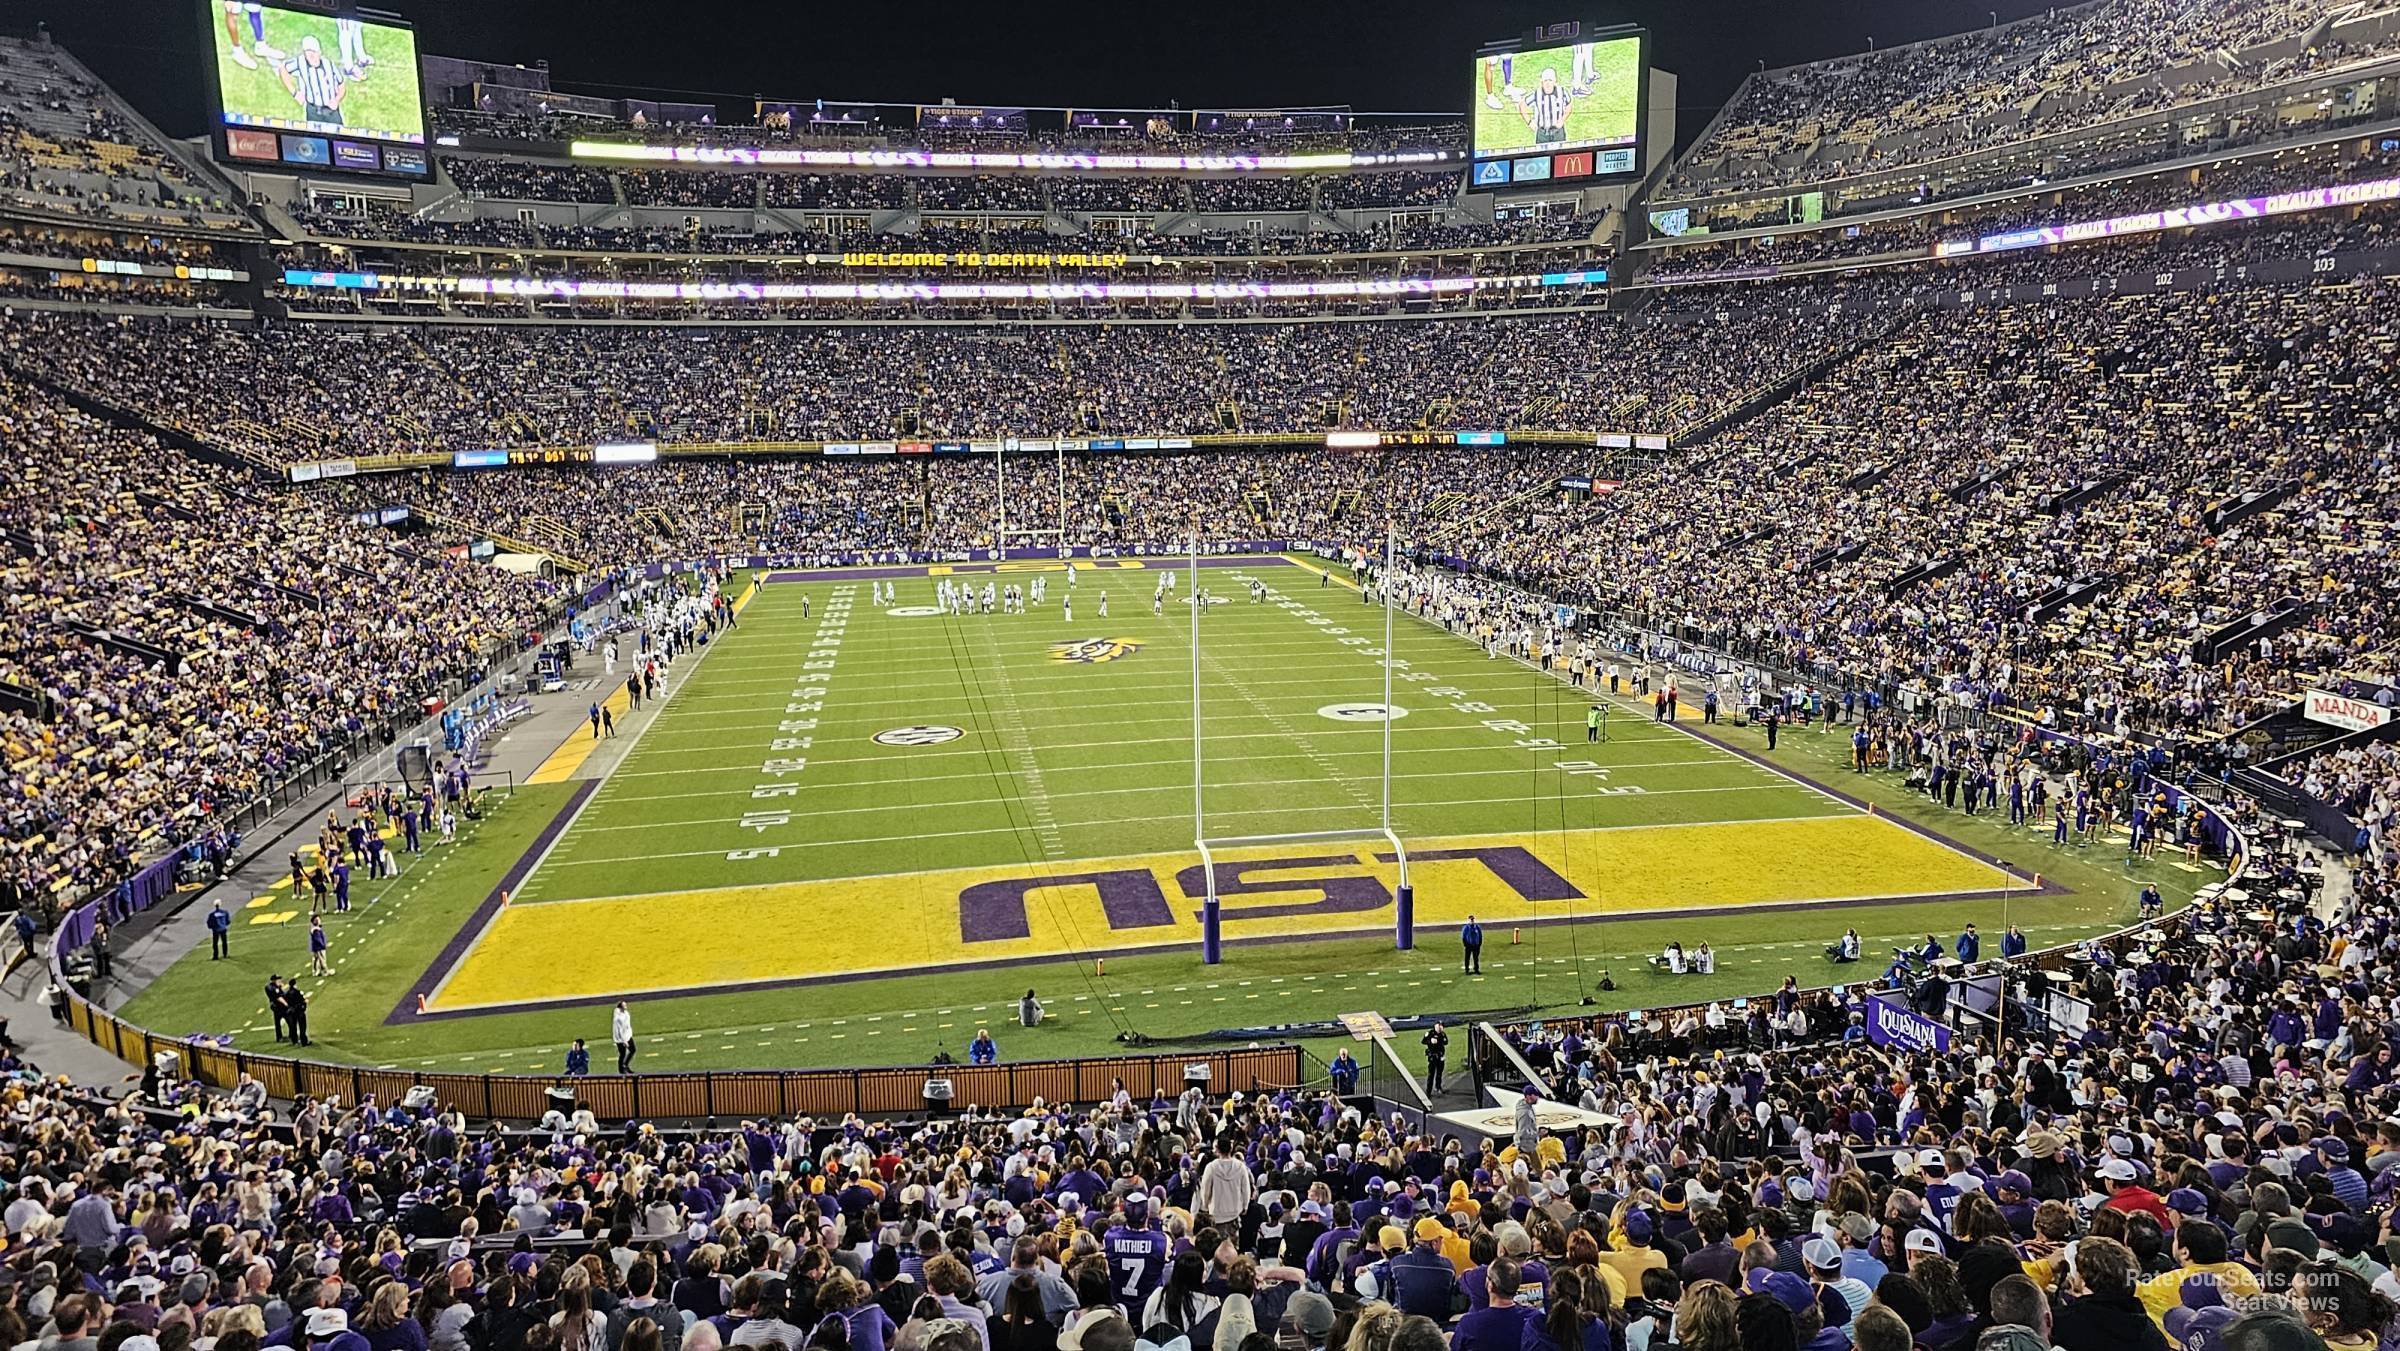 section 234, row 1 seat view  - tiger stadium